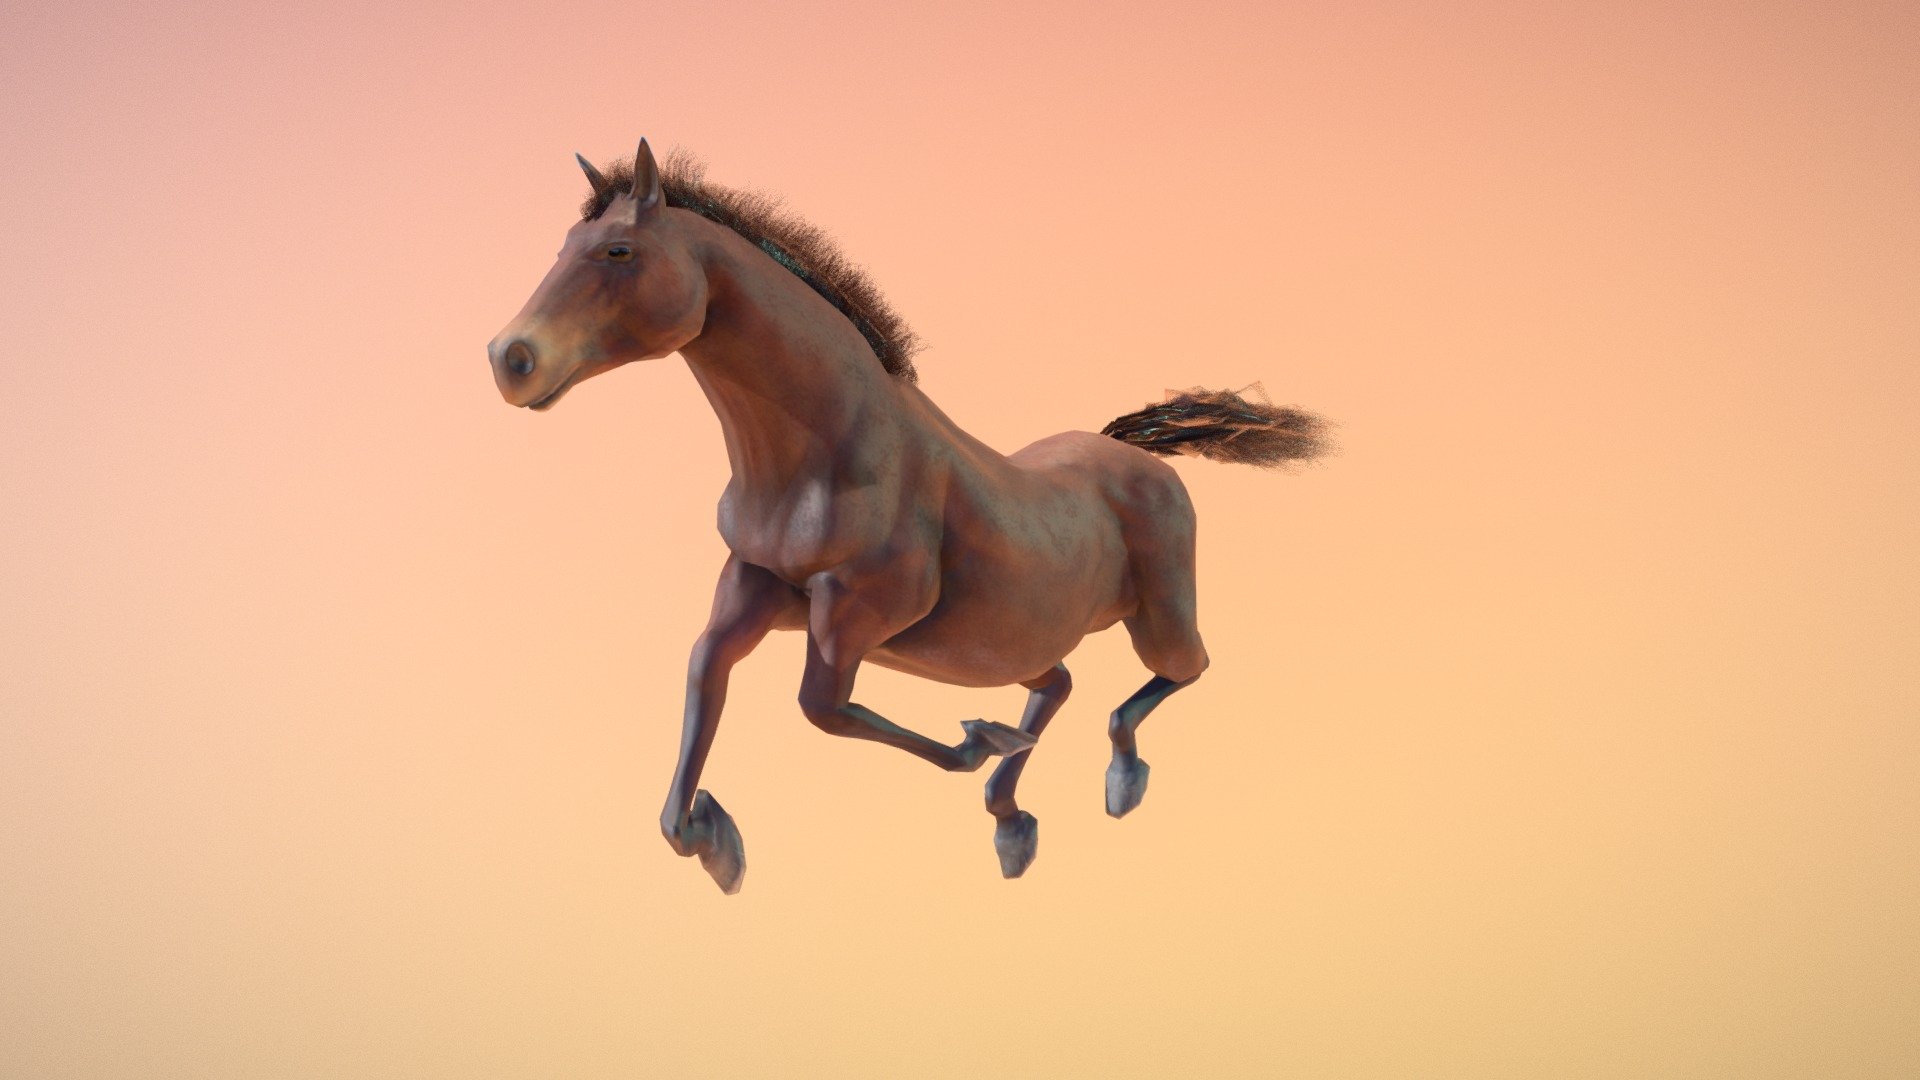 Animated simple low poly model of horse.

Model has built and animated in blender. 
One piece, tris and quads only, 2K textures.
Faces: 5144
Tris: 10 128

5 animations:
- walk
- gallop
- simple stay
- stay
- eating

Hairs created from planes+alpha.

In blender file horse have hair systems for tail and mane 3d model